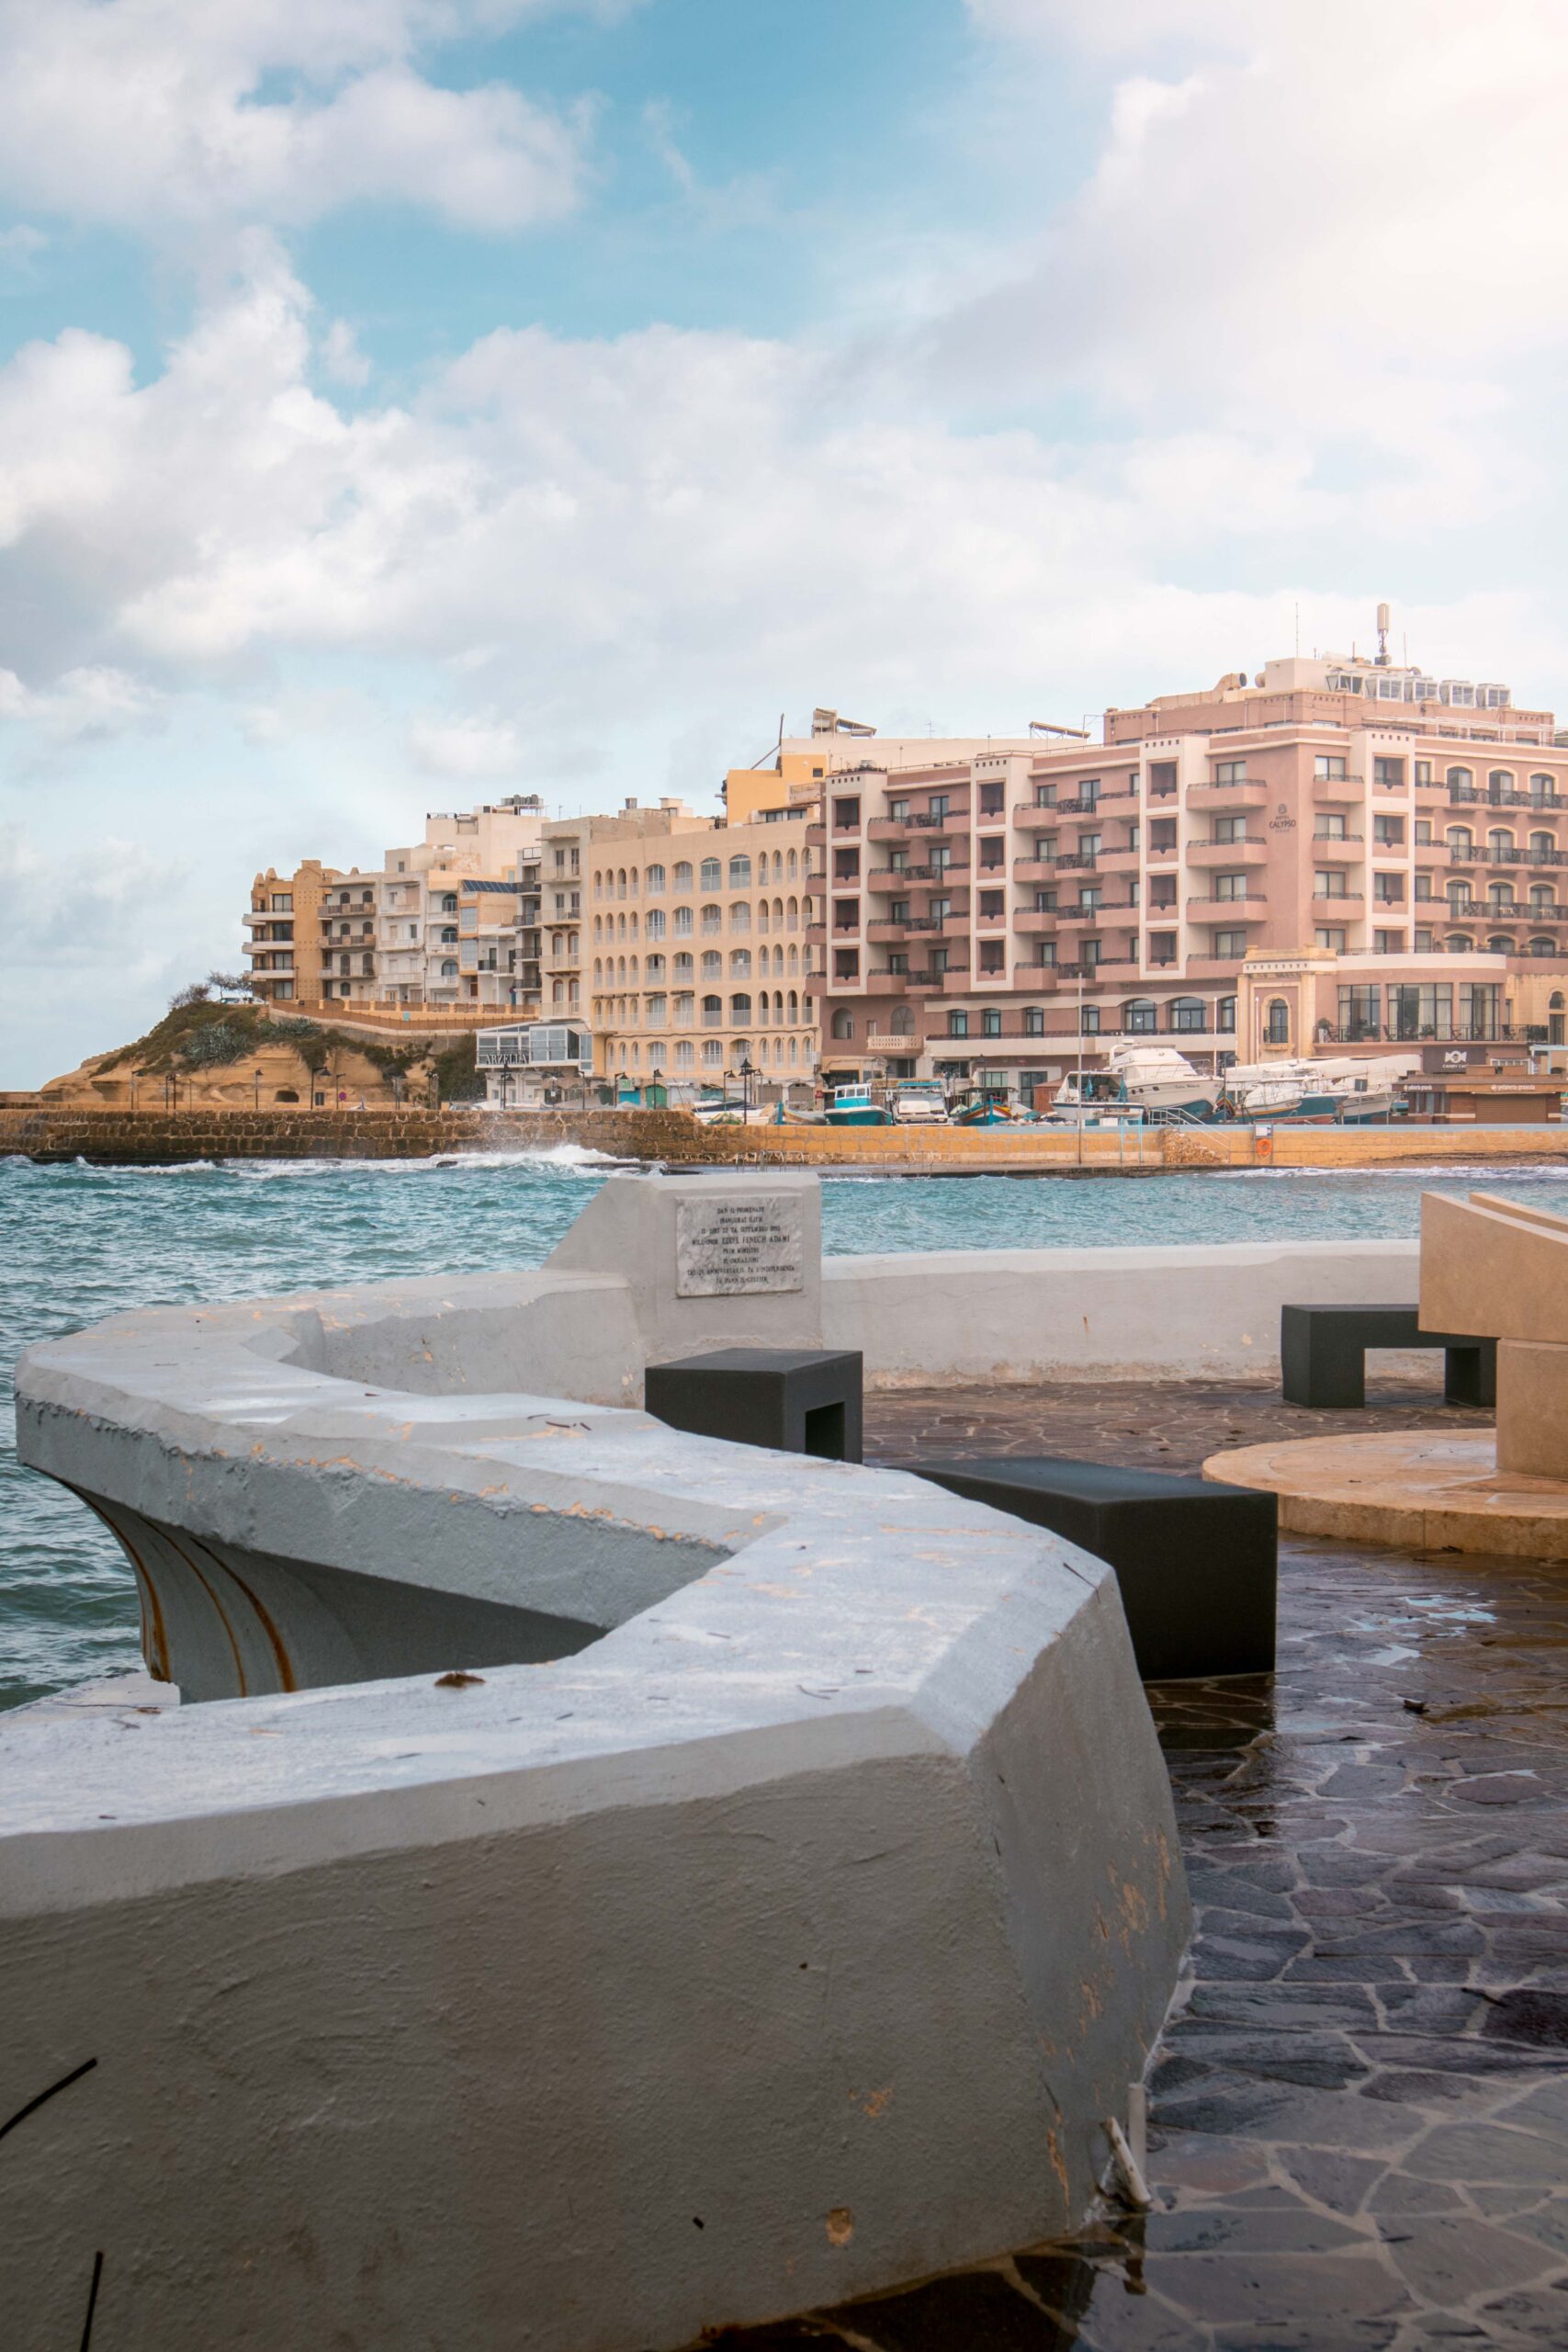 Seaside viewpoint and buildings in Marsalforn on Gozo island, Malta